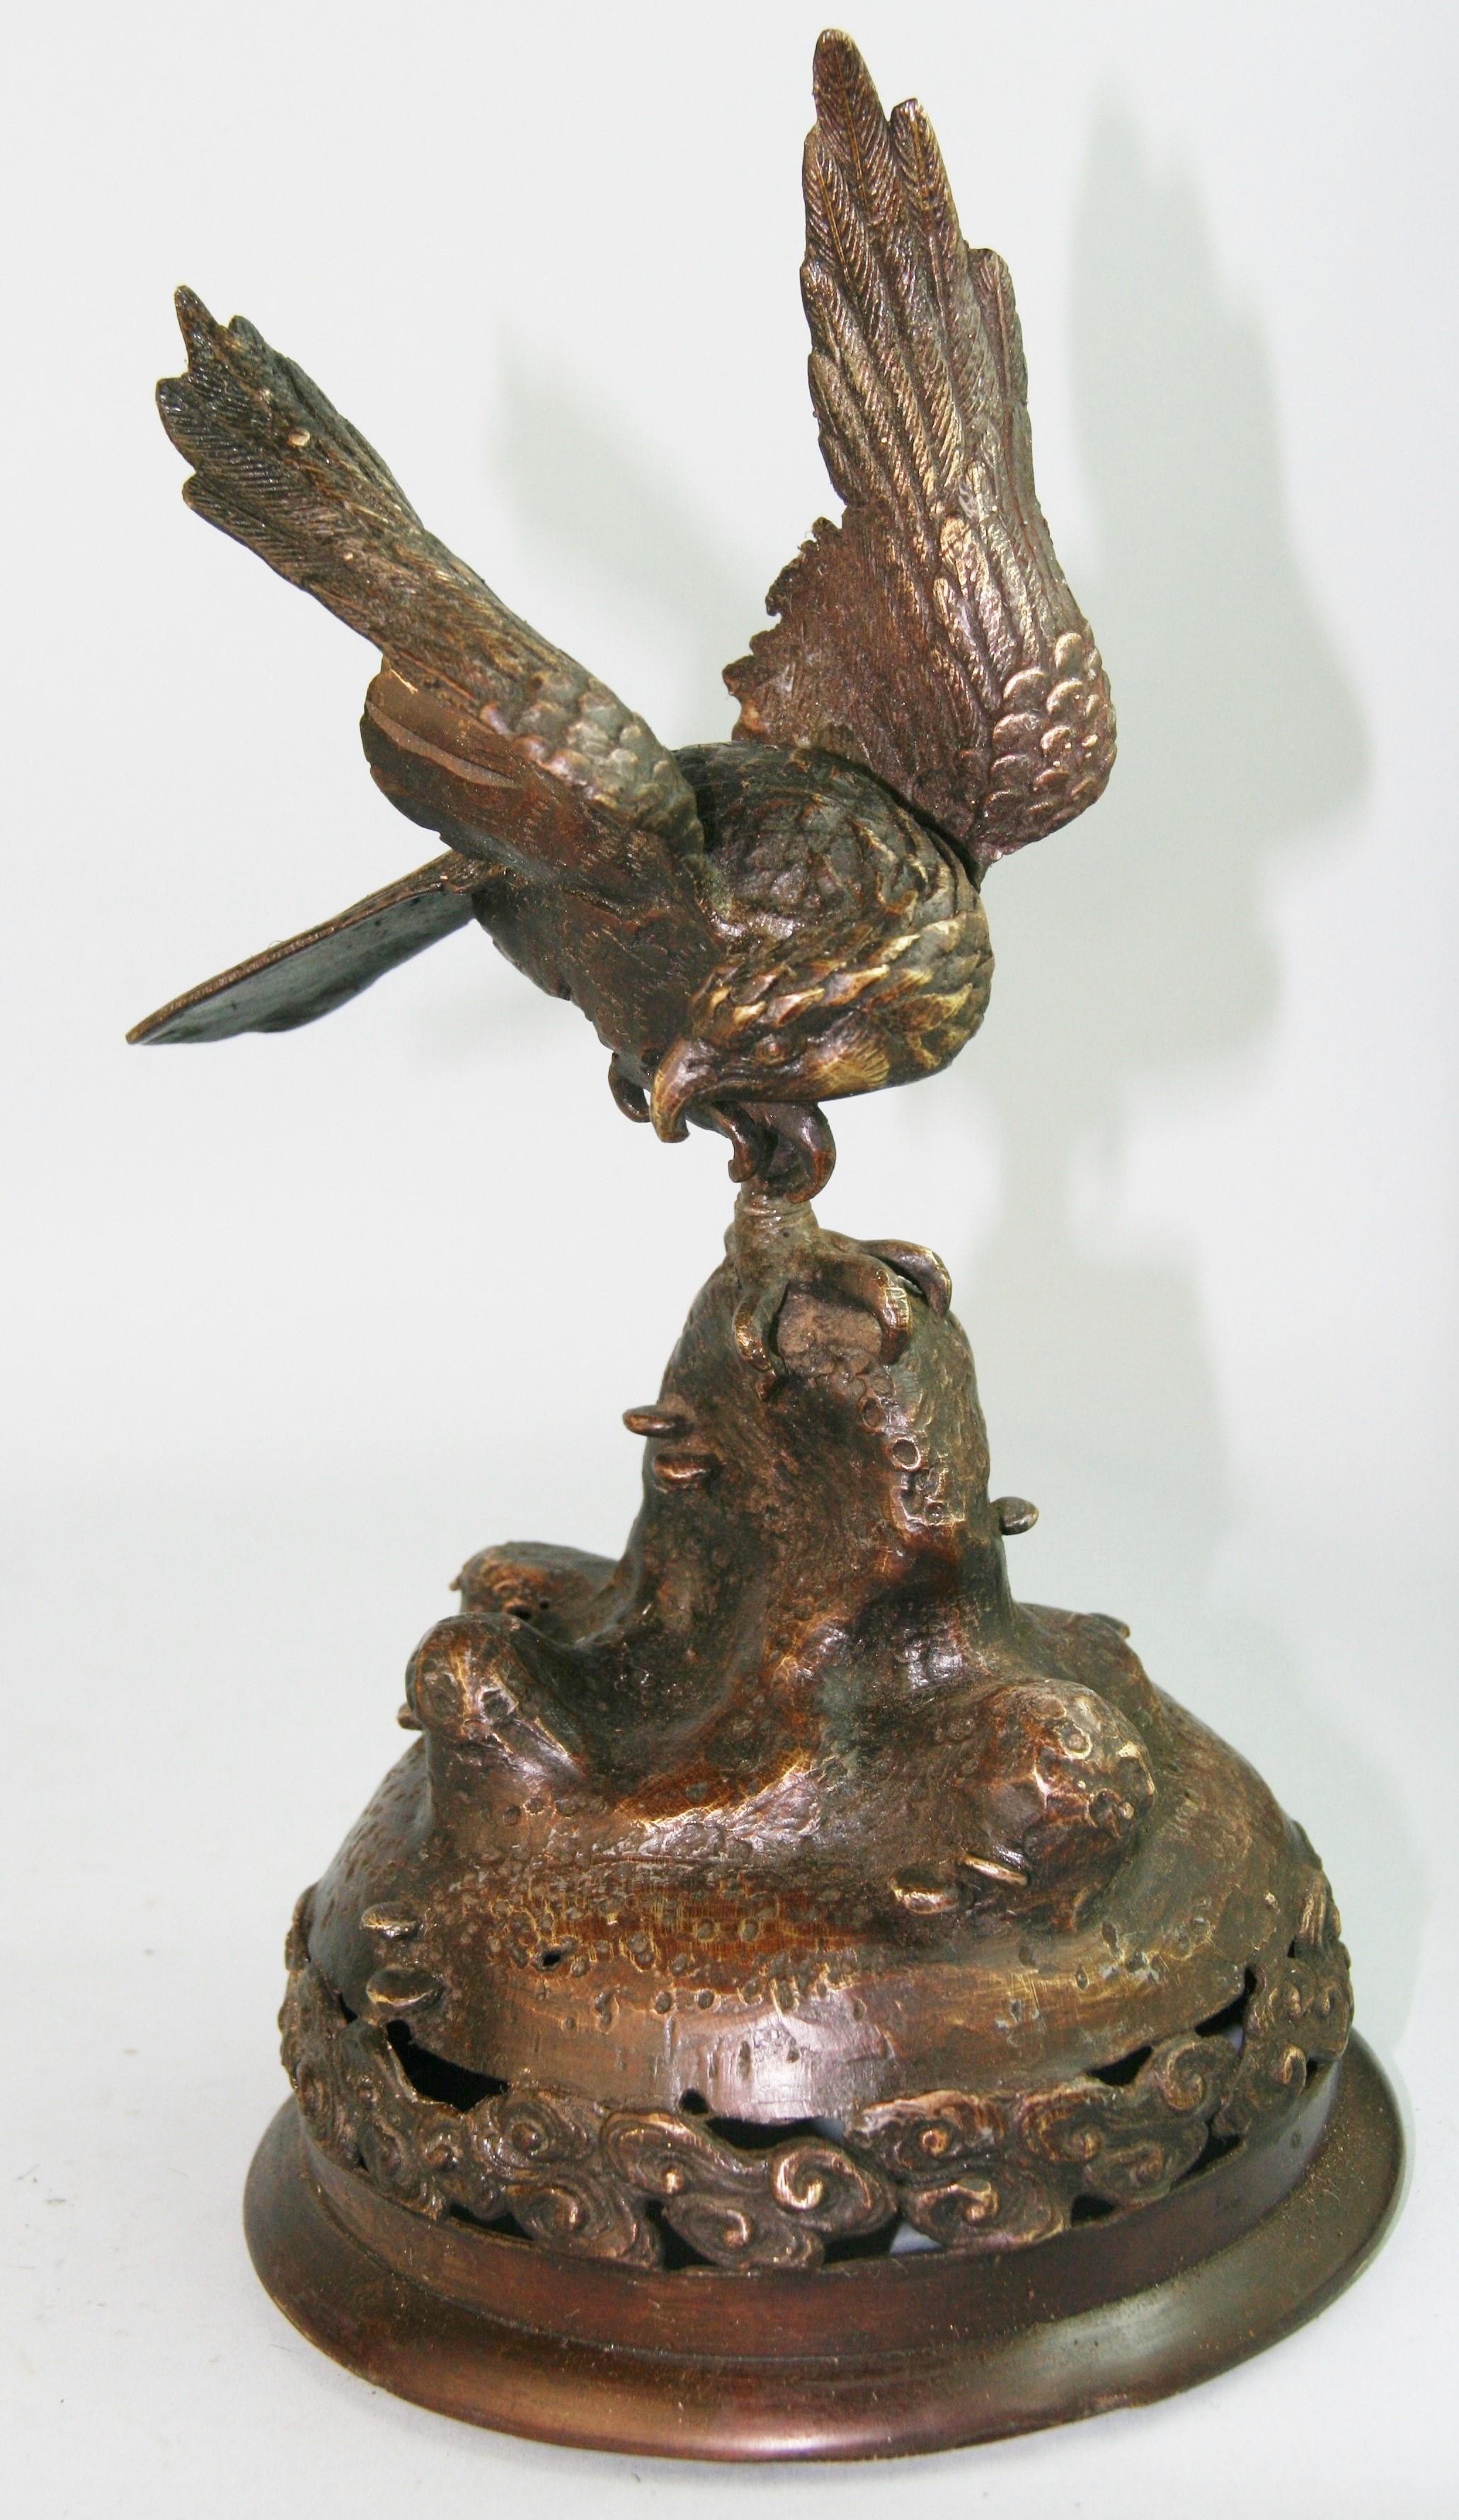 1231 Finely detailed cast bronze hawk room guardian  sculpture.
In Japanese culture ,hawks are a symbol of good fortune and luck because of their clever nature 